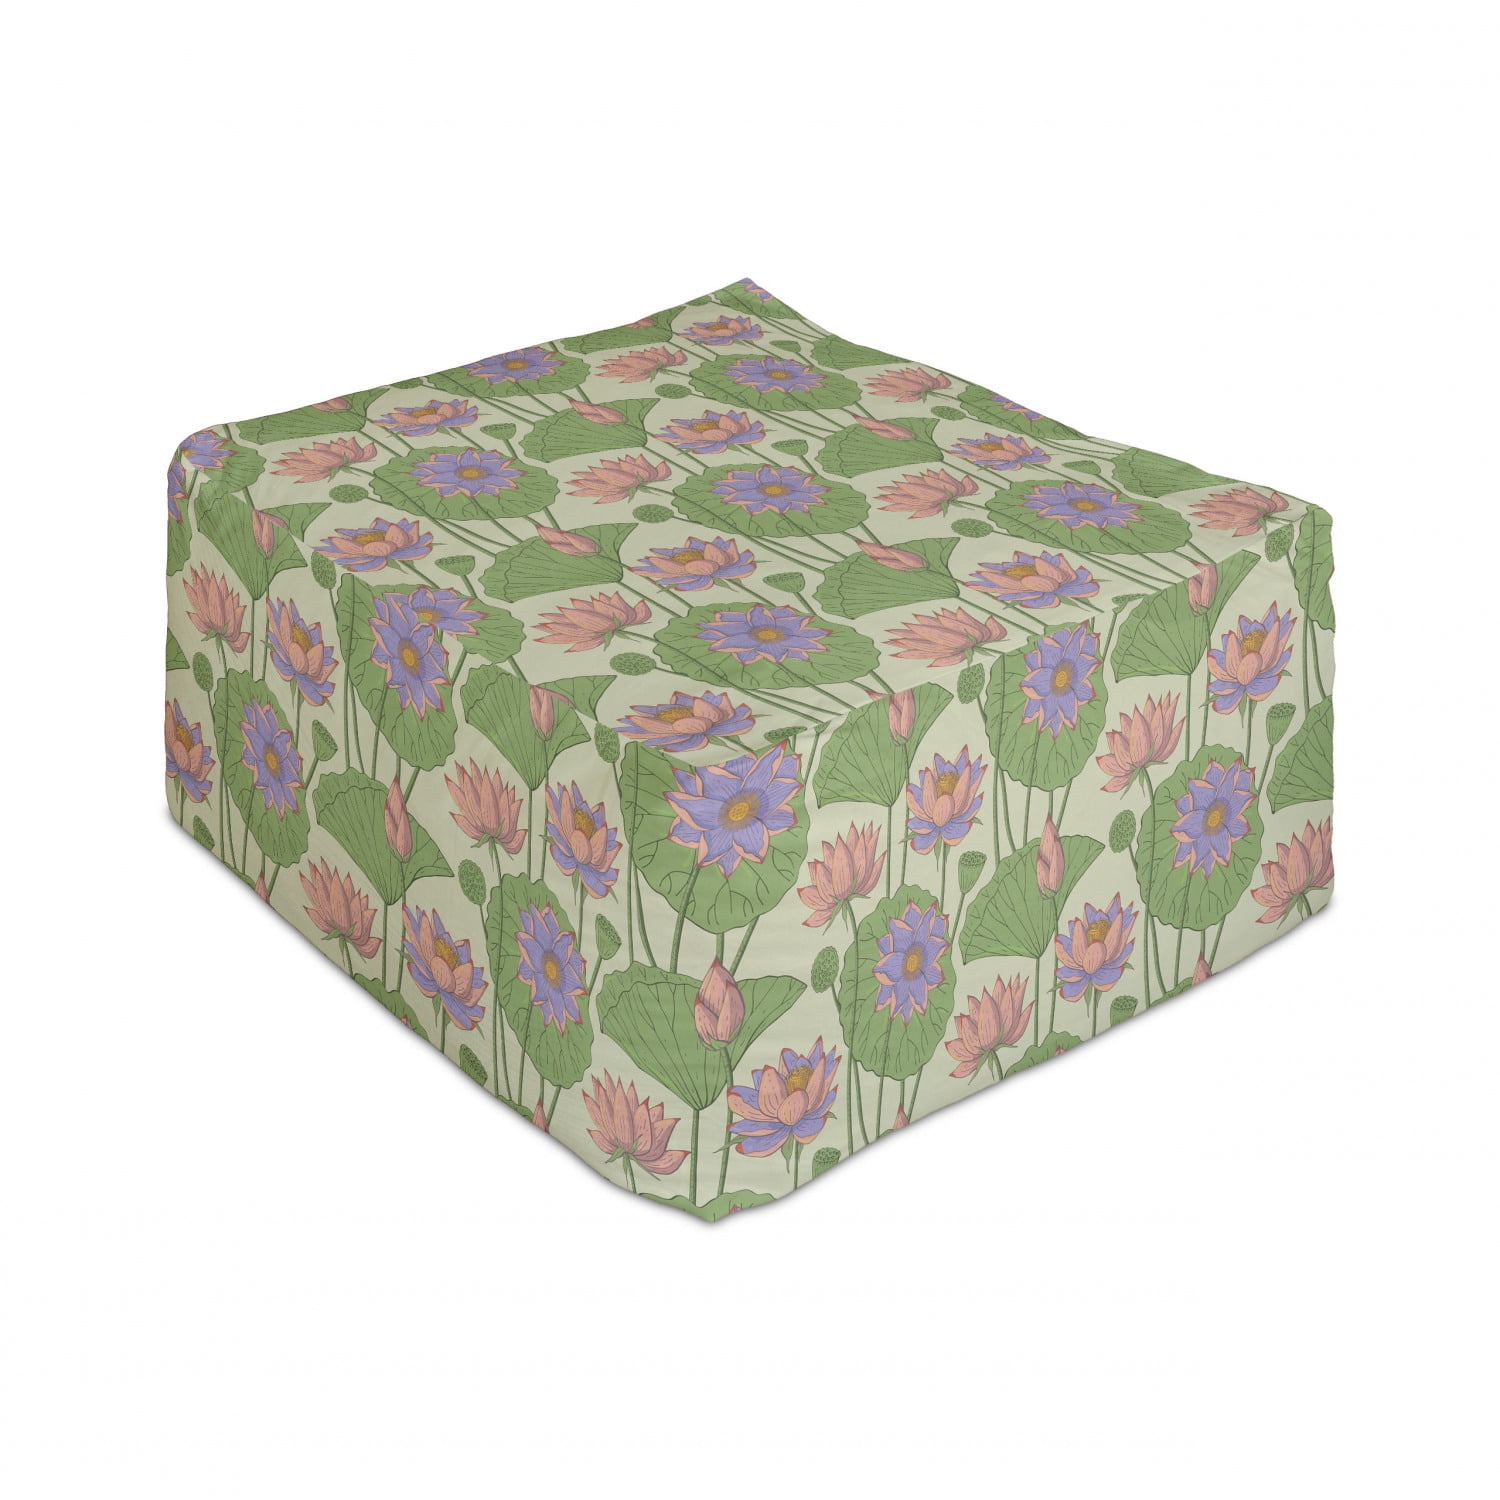 Ambesonne Flower Rectangle Pouf 25 Yellow Coral and Green Under Desk Foot Stool for Living Room Office Ottoman with Cover Hand Drawn Like Sketchy Floral Pattern of Gladiolus Spring Season Blooms